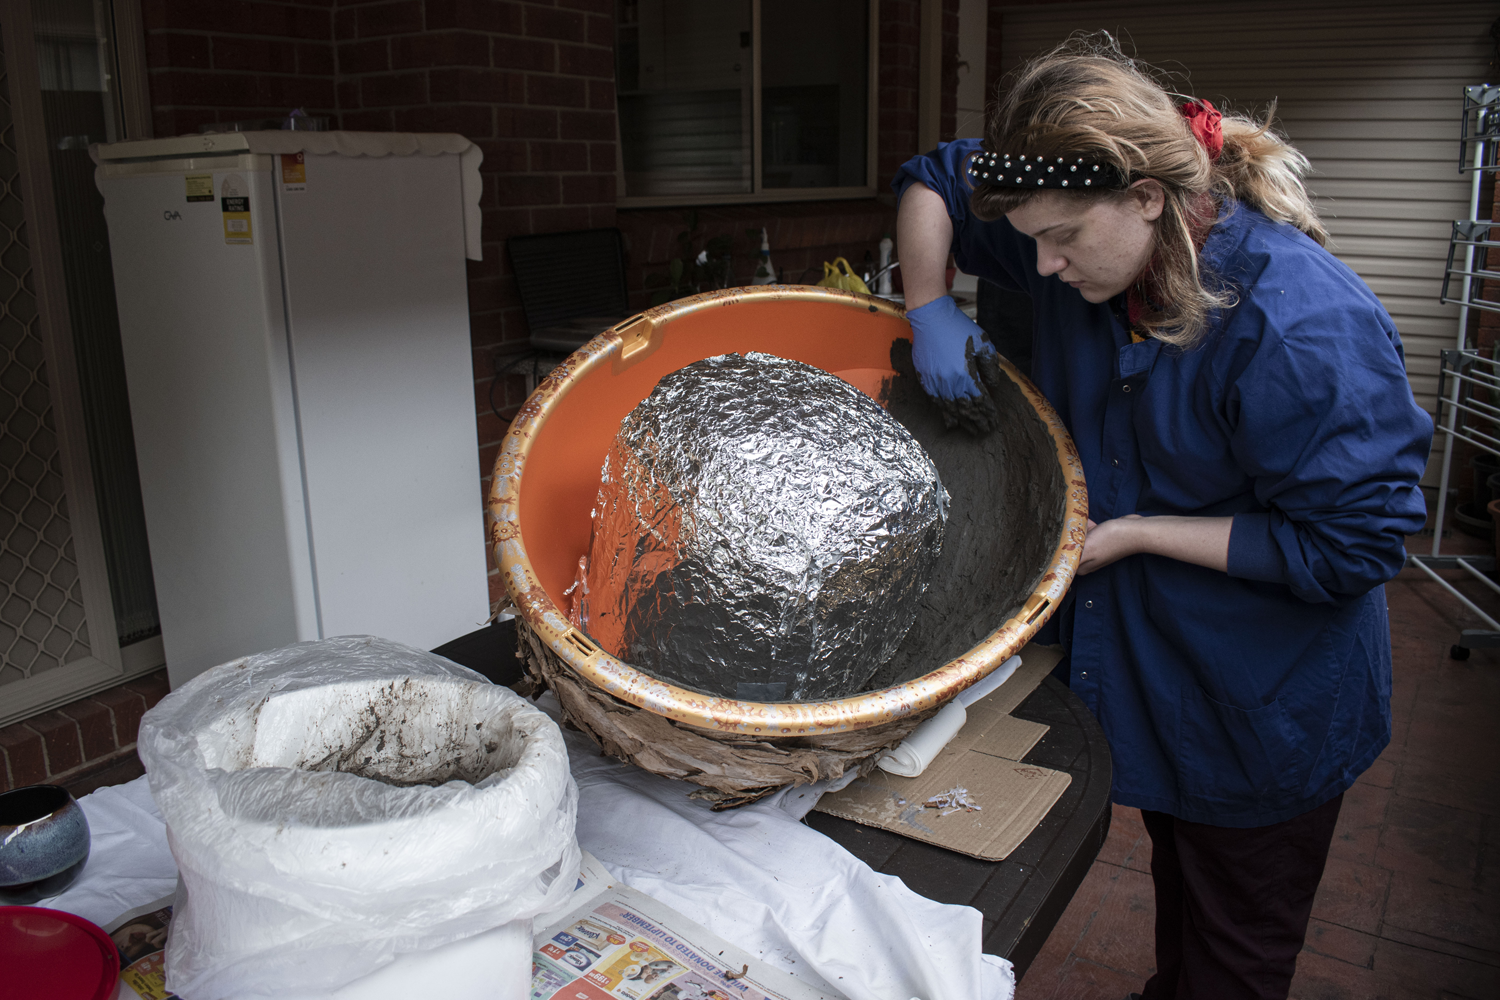 making process of sculpture by lathering clay/soil mixture on work. 